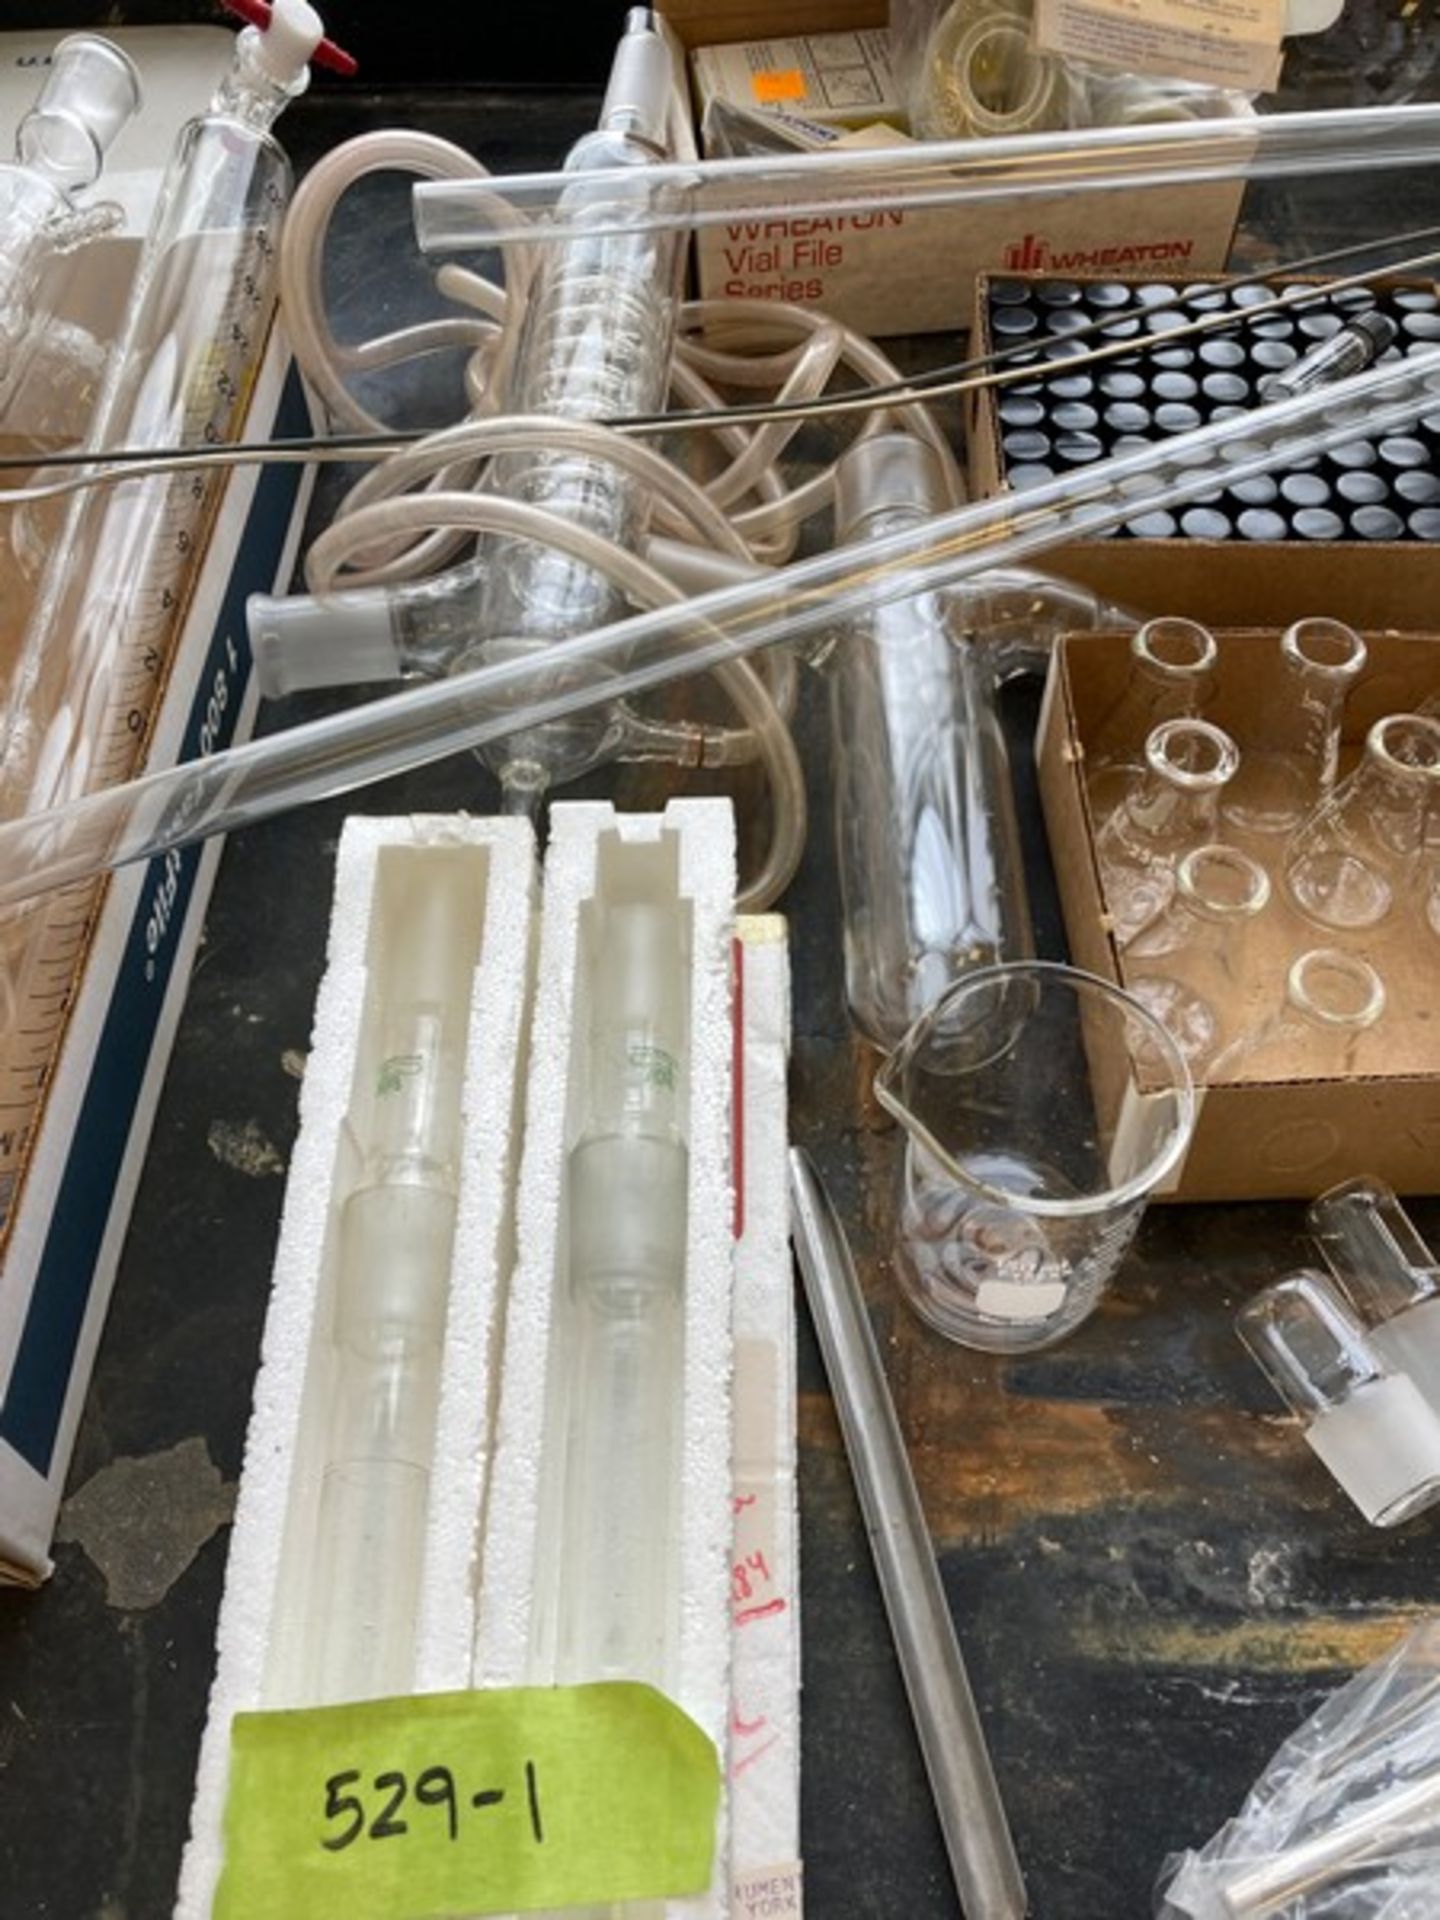 approx 20 boxes Lab accessories & Glassware (on 3 tables & floor) - small carboys, flat glass domes, - Image 3 of 20